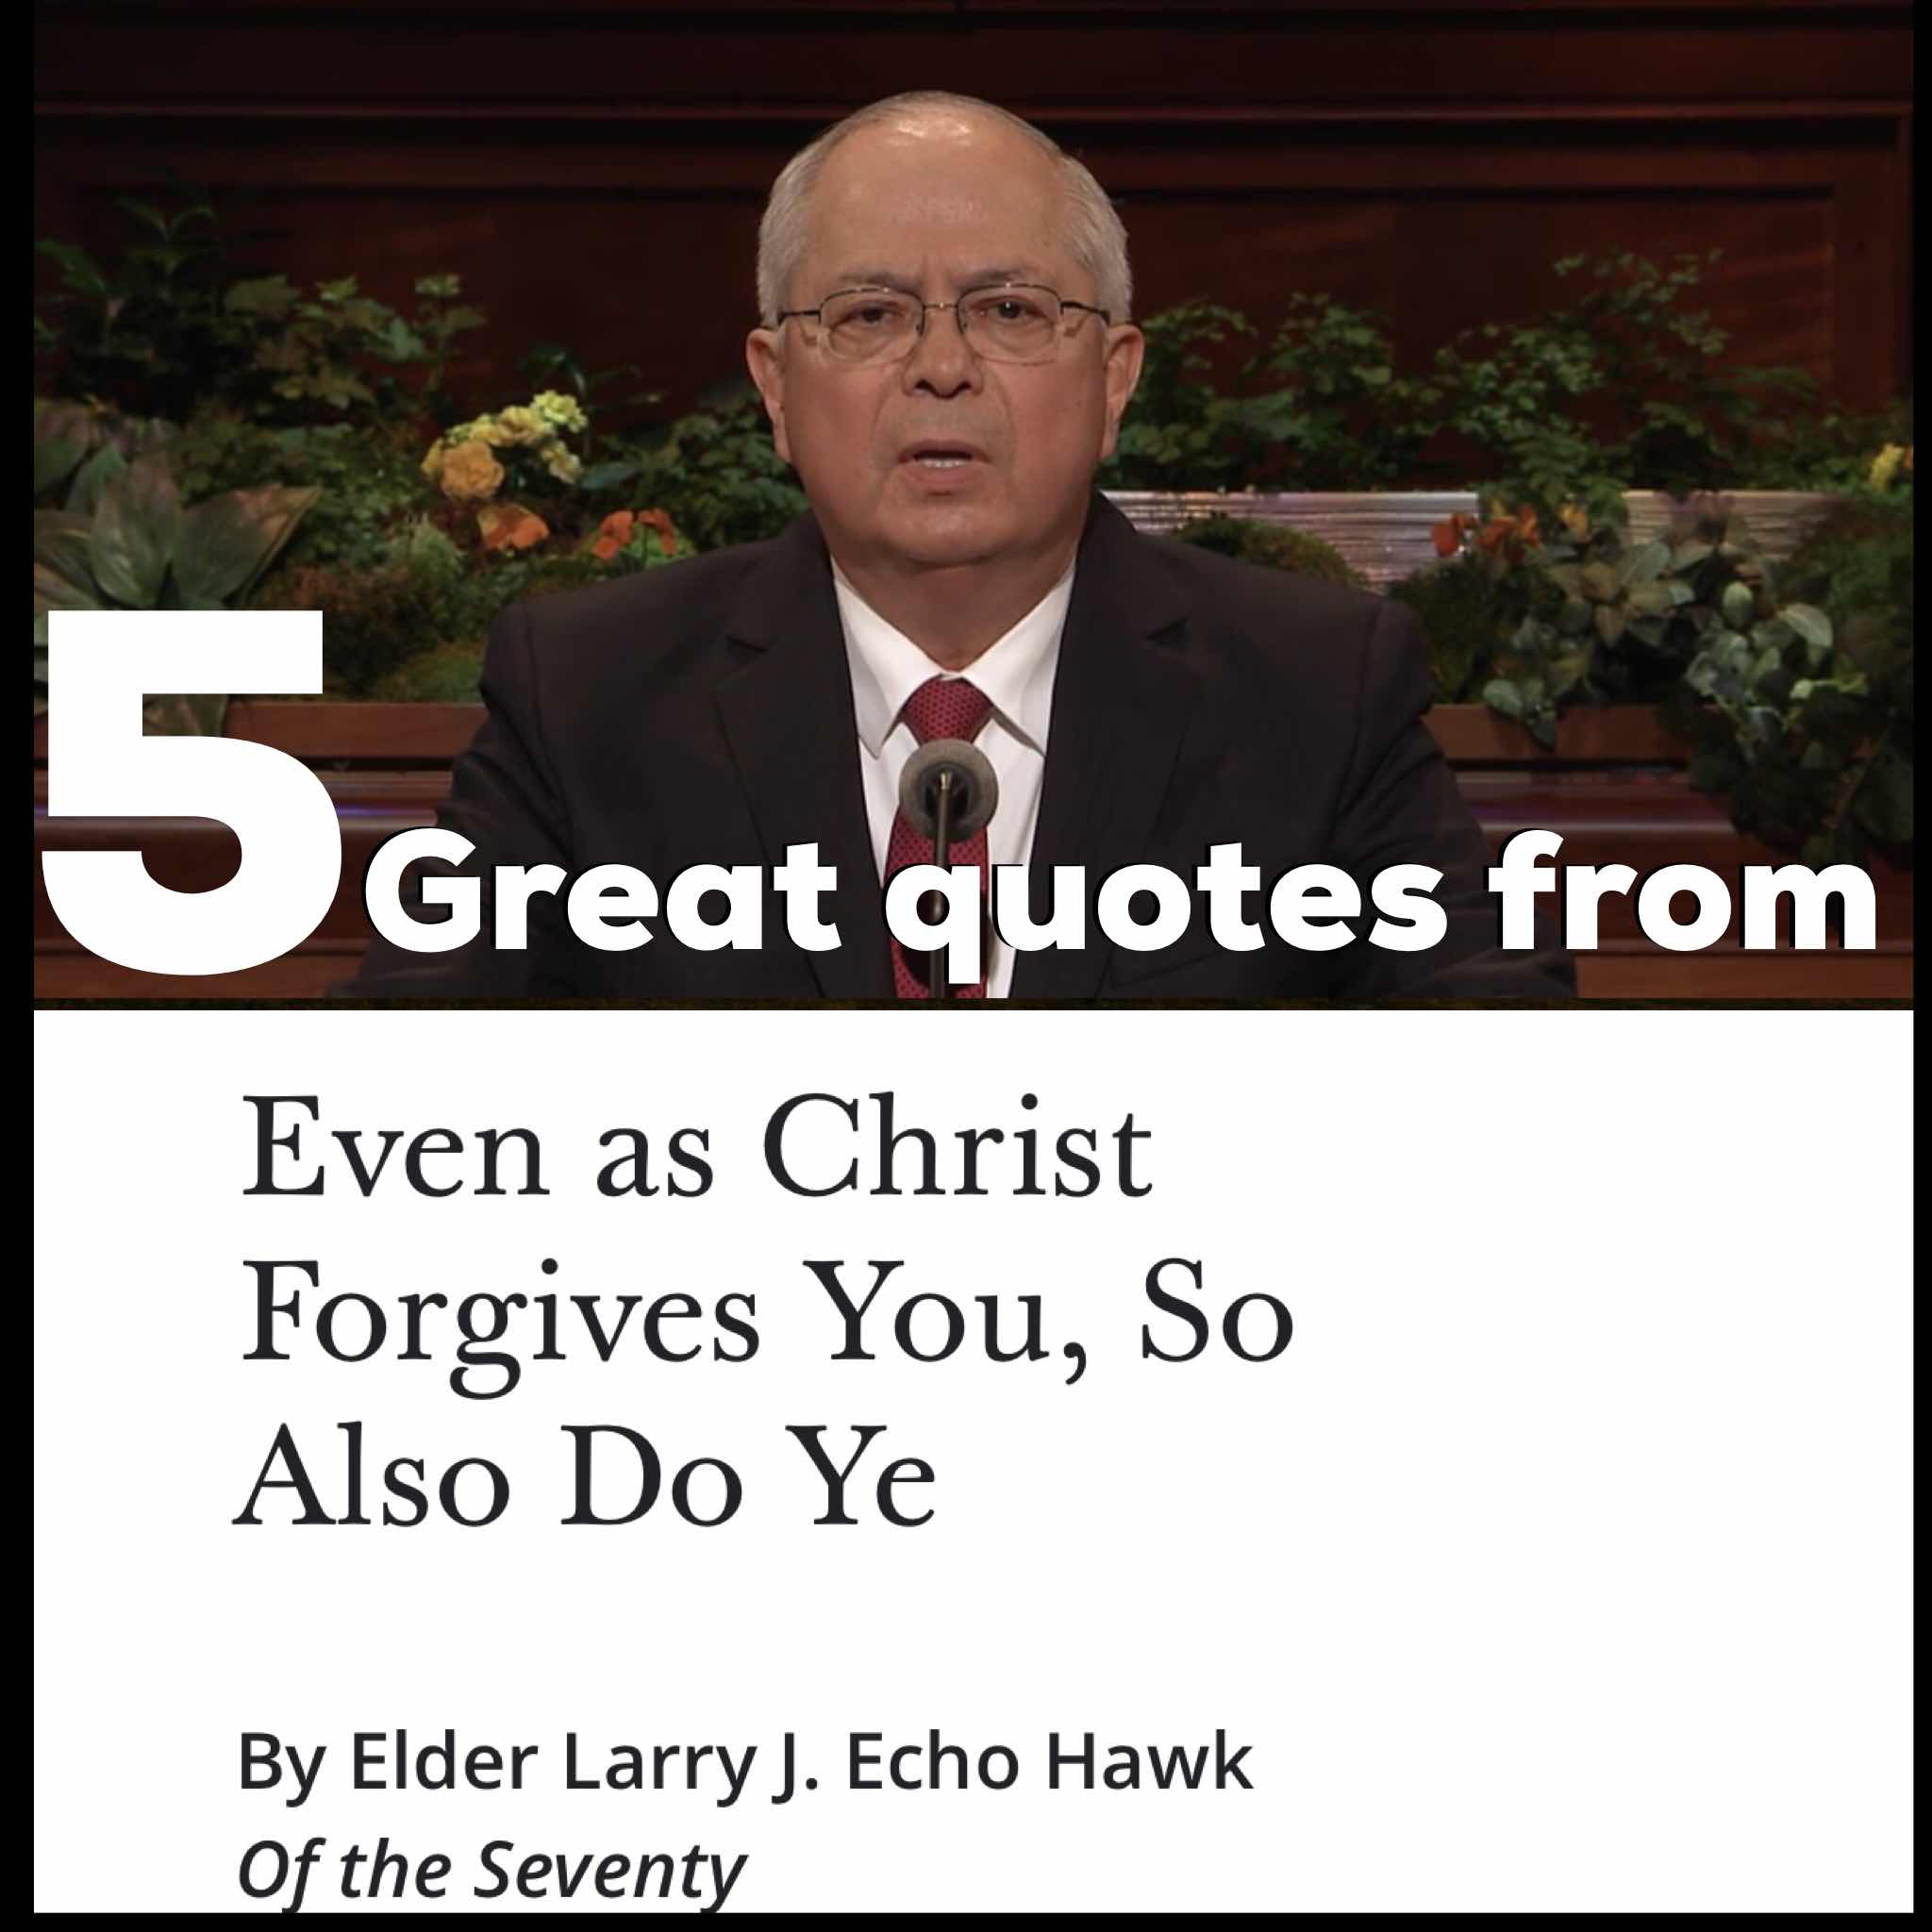 5 great quotes from Larry J. Echo Hawks talk “Even as Christ Forgives you, So also do ye